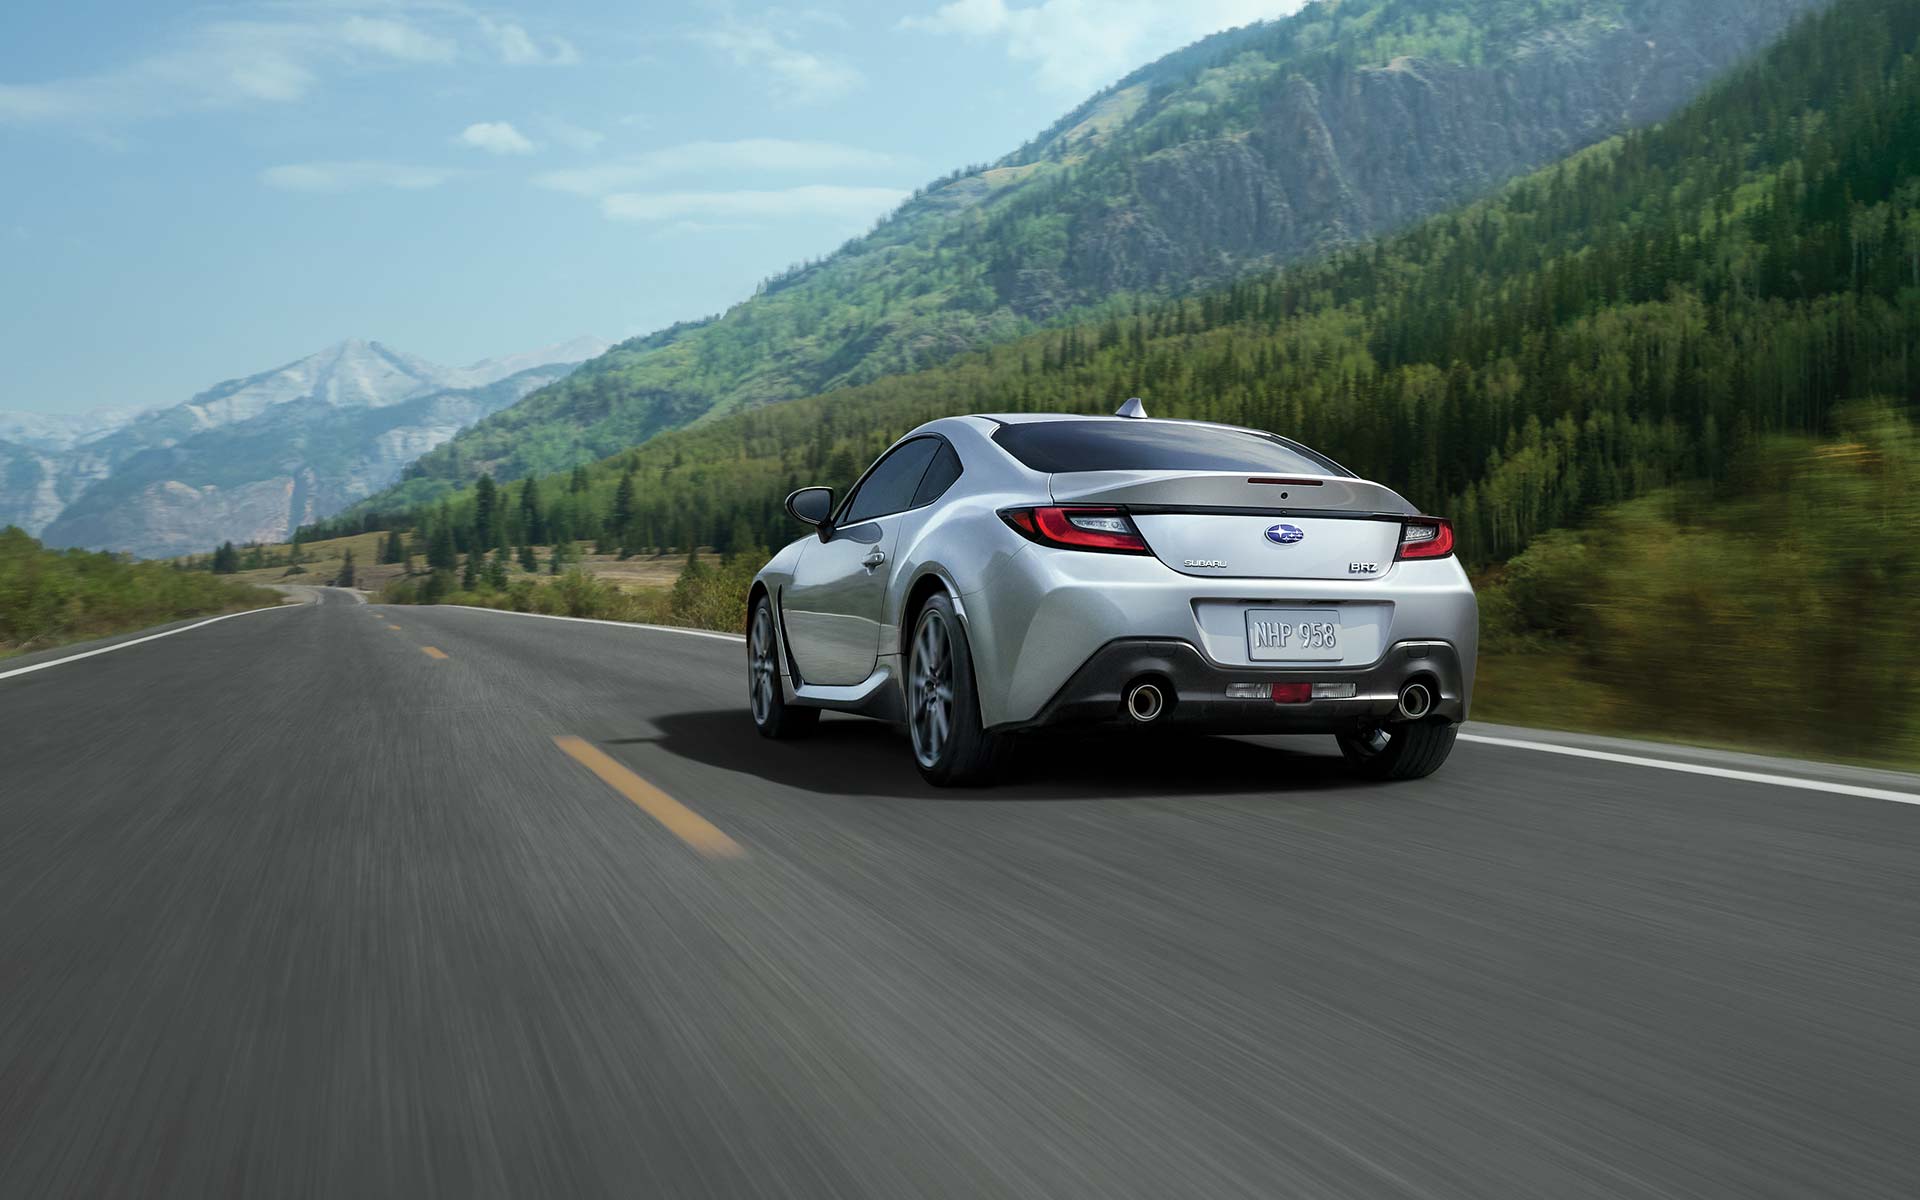 2022 Subaru BRZ Limited shown in Ice Silver Metallic driving down a highway.